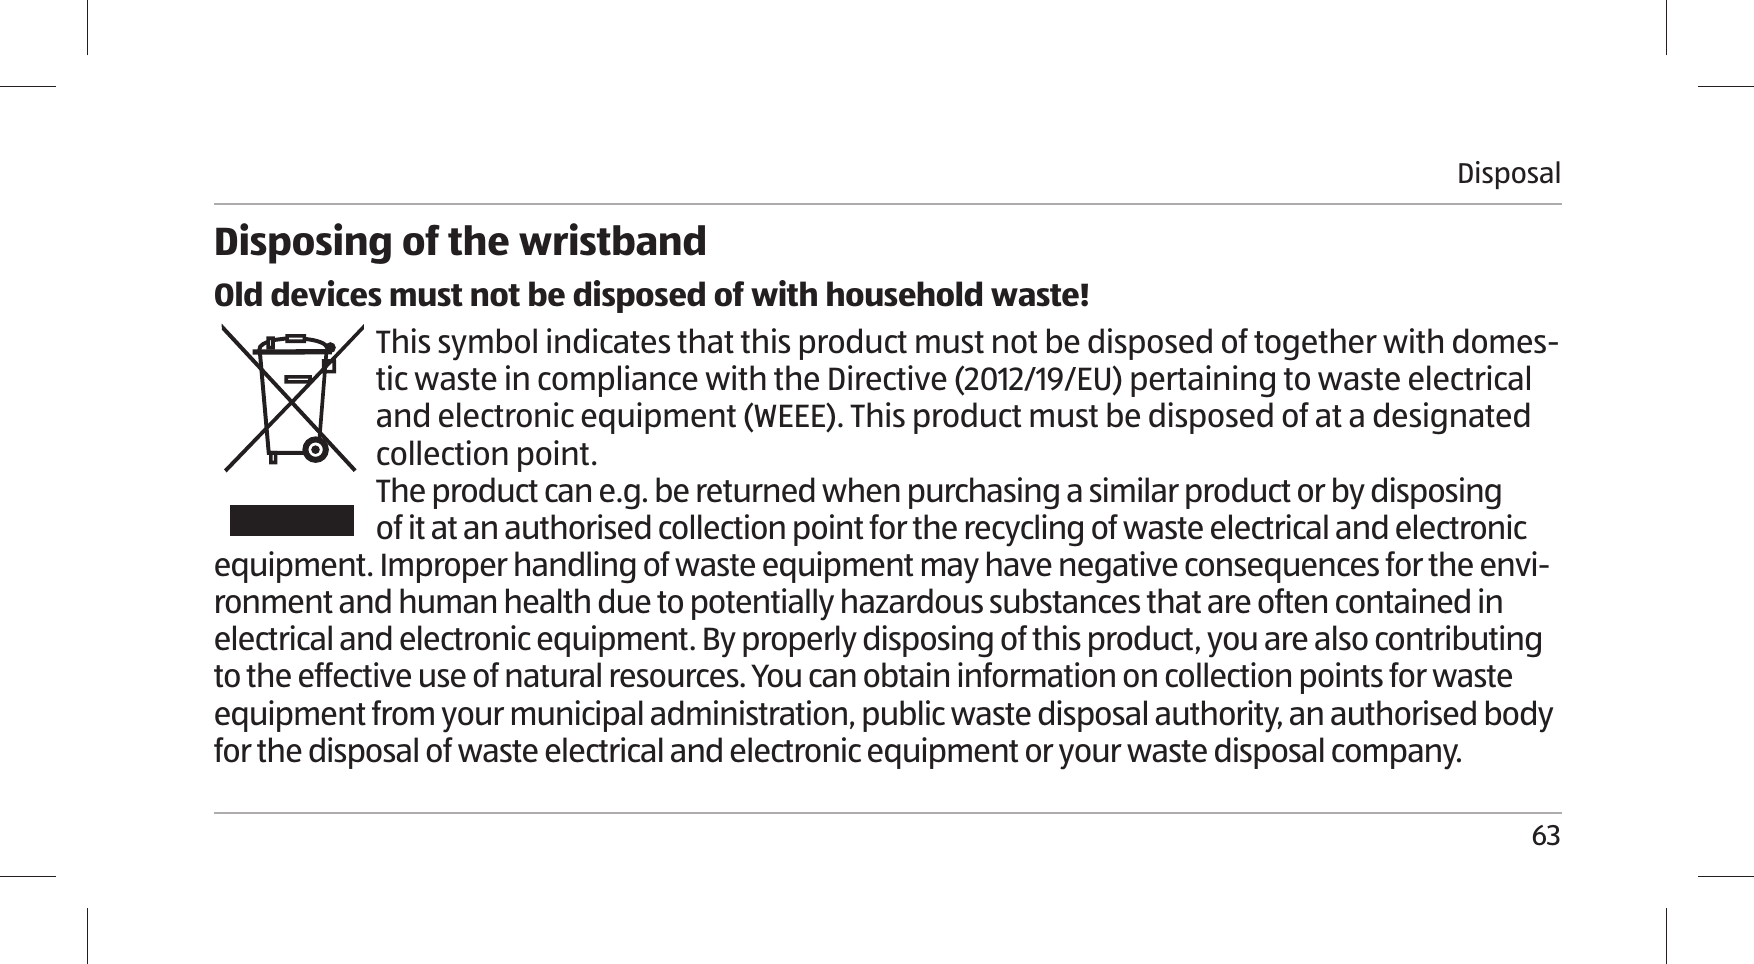 Disposal63Disposing of the wristbandOld devices must not be disposed of with household waste!This symbol indicates that this product must not be disposed of together with domes-tic waste in compliance with the Directive (2012/19/EU) pertaining to waste electrical and electronic equipment (WEEE). This product must be disposed of at a designated collection point. The product can e.g. be returned when purchasing a similar product or by disposing of it at an authorised collection point for the recycling of waste electrical and electronic equipment. Improper handling of waste equipment may have negative consequences for the envi-ronment and human health due to potentially hazardous substances that are often contained in electrical and electronic equipment. By properly disposing of this product, you are also contributing to the effective use of natural resources. You can obtain information on collection points for waste equipment from your municipal administration, public waste disposal authority, an authorised body for the disposal of waste electrical and electronic equipment or your waste disposal company.